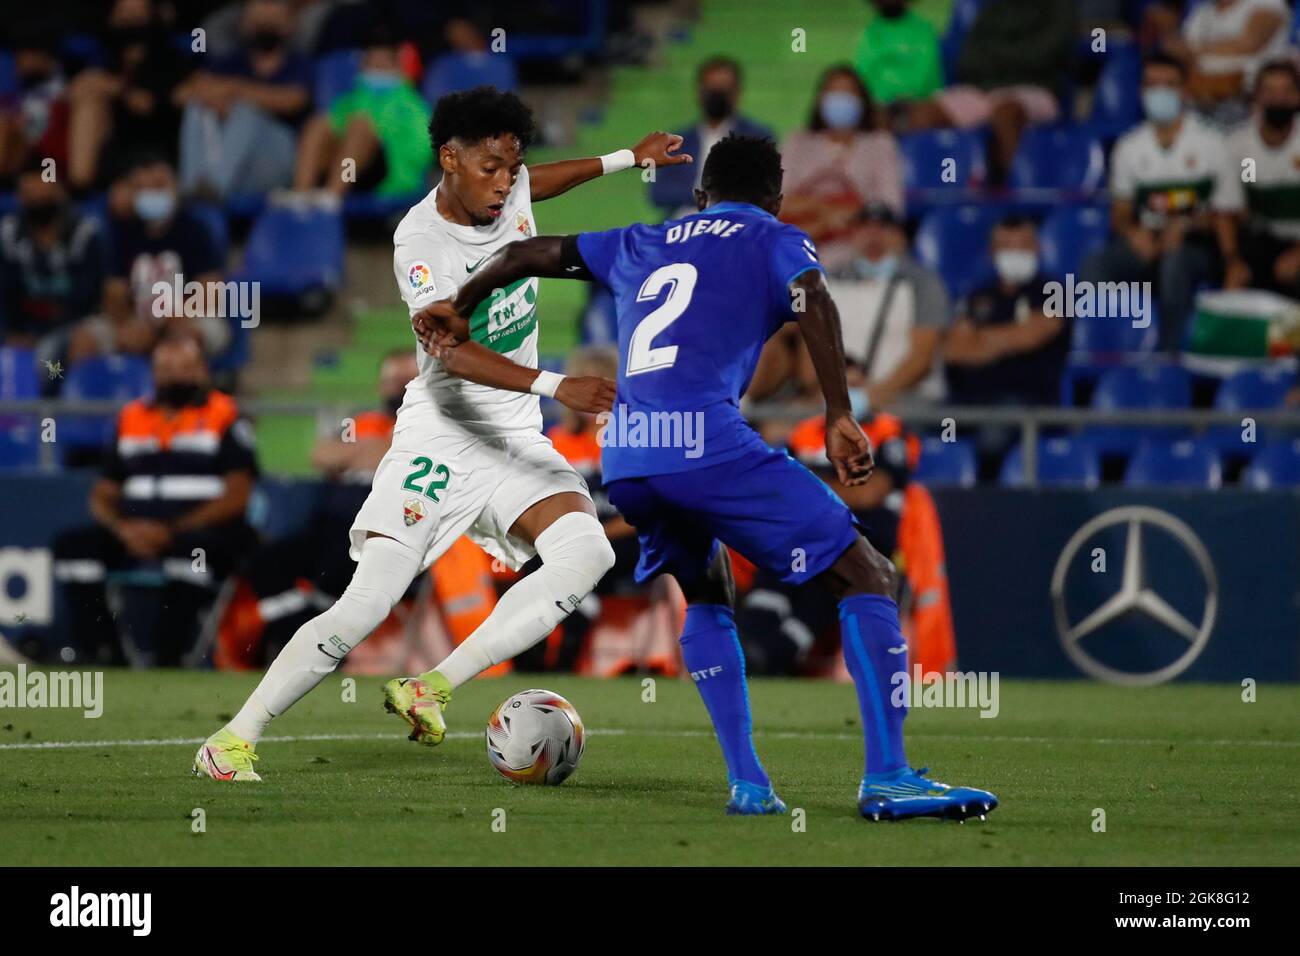 Madrid, Spain. 13th Sep 2021. Johan Mojica of Elche CF in action with Djene of Getafe CF during the Liga match between Getafe CF and Elche CF at Coliseum Alfonso Perez Stadium in Madrid, Spain. Credit: DAX Images/Alamy Live News Stock Photo